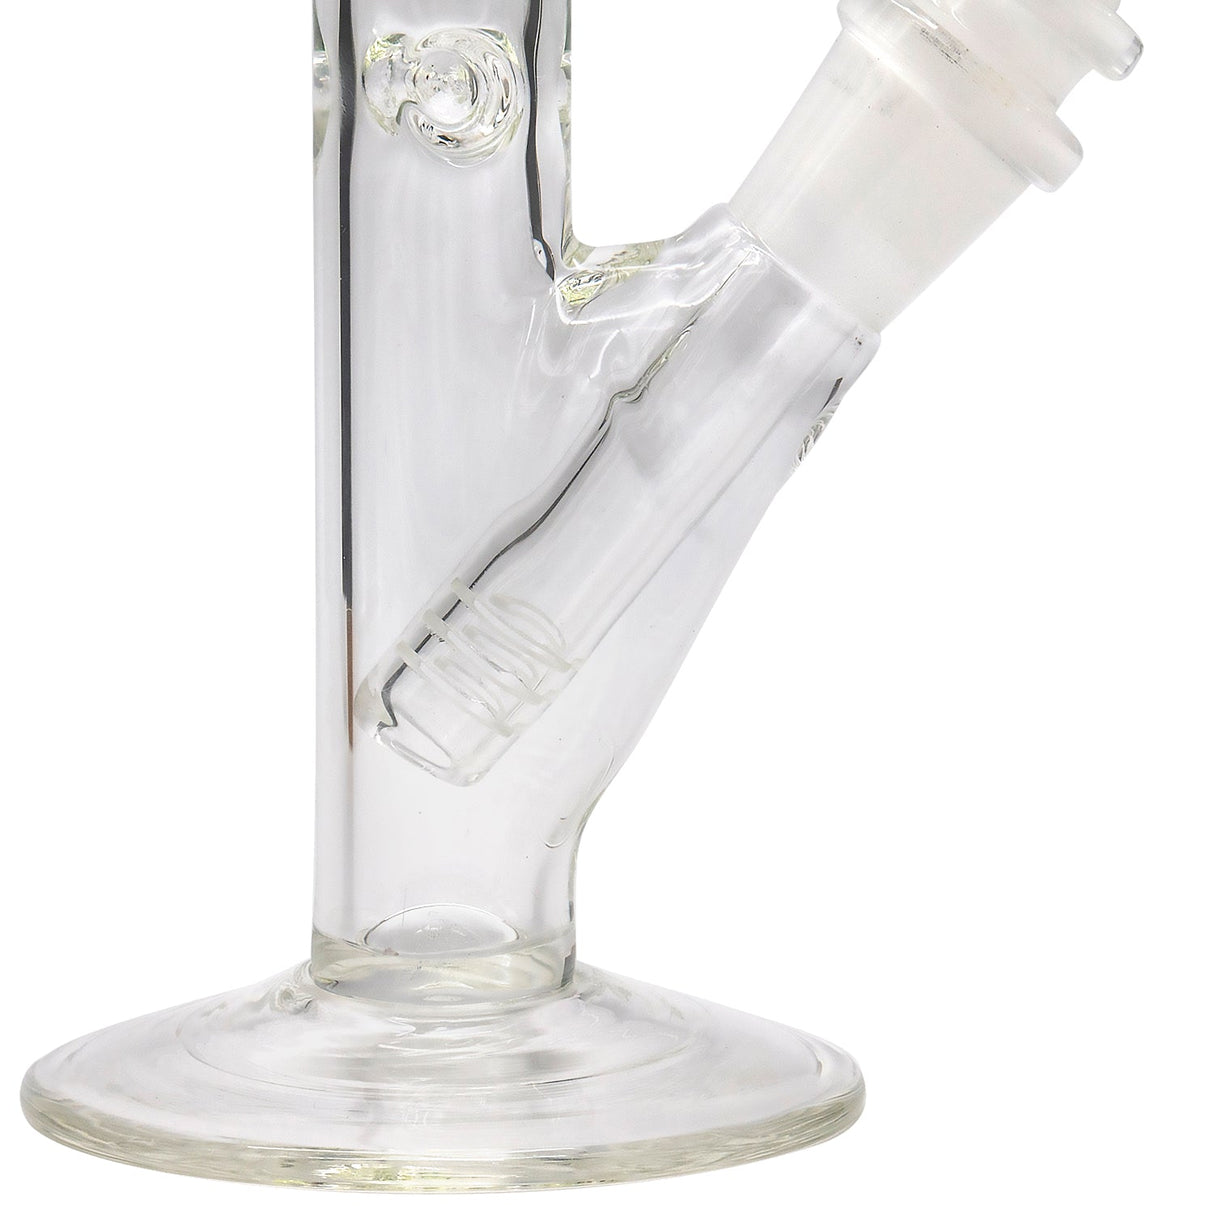 LA Pipes 14" Slim Straight Glass Waterpipe close-up with clear borosilicate glass and 45-degree joint